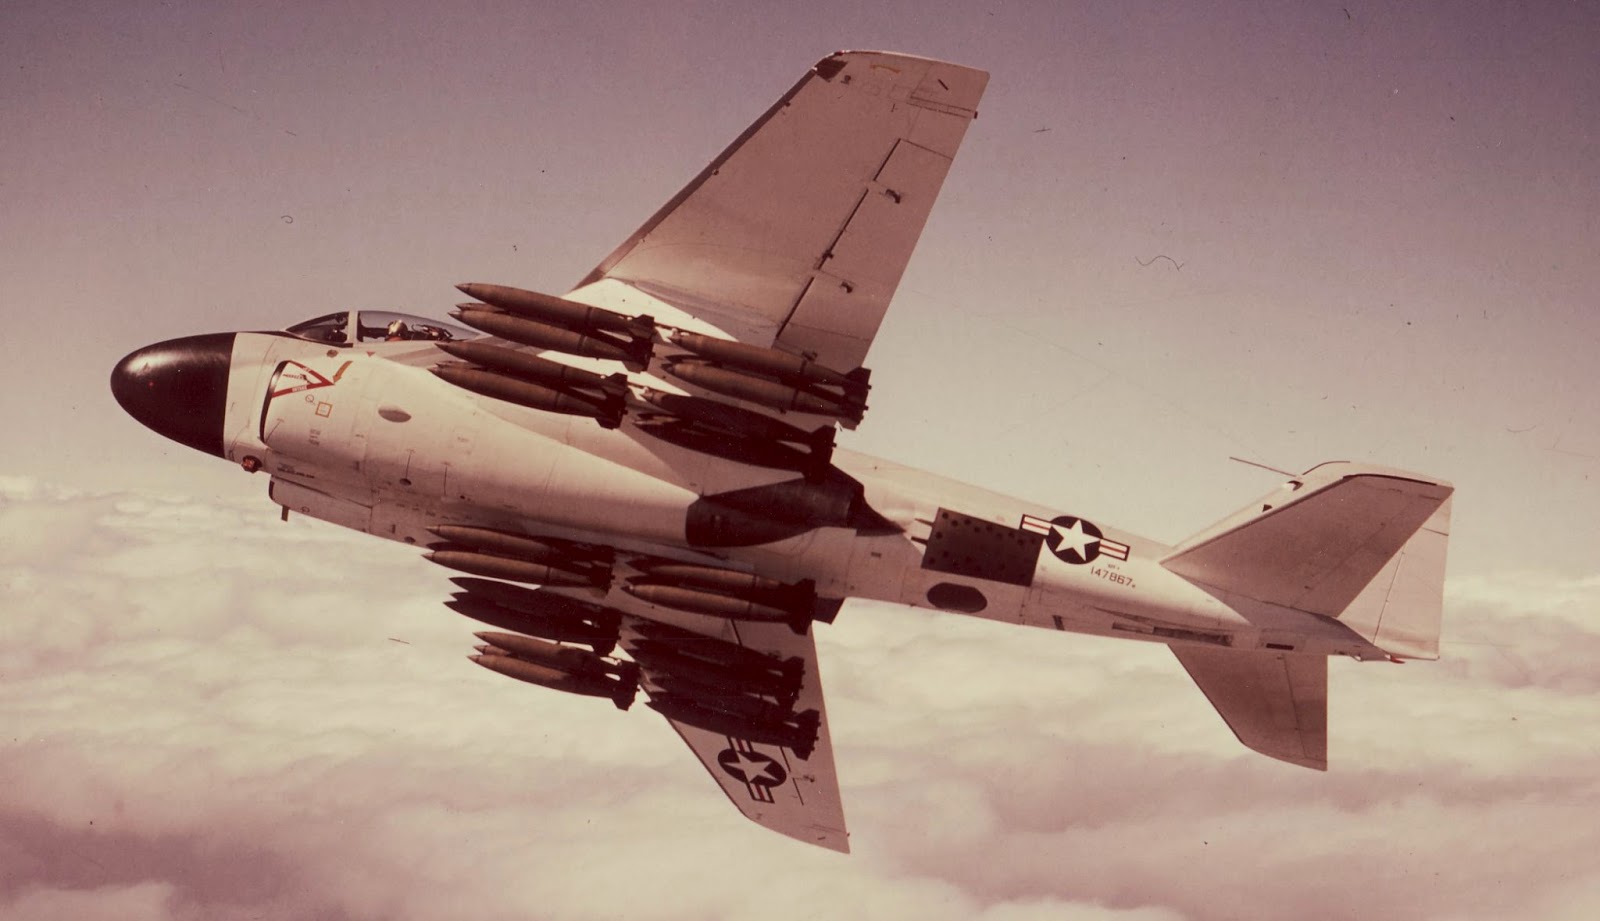 Grumman YA2F-1 (A-6A) Intruder Bu. No. 147867, the third prototype, carrying thirty Mk. 82 low-drag bombs on multiple ejector racks under the wings and fuselage. (U.S. Navy)